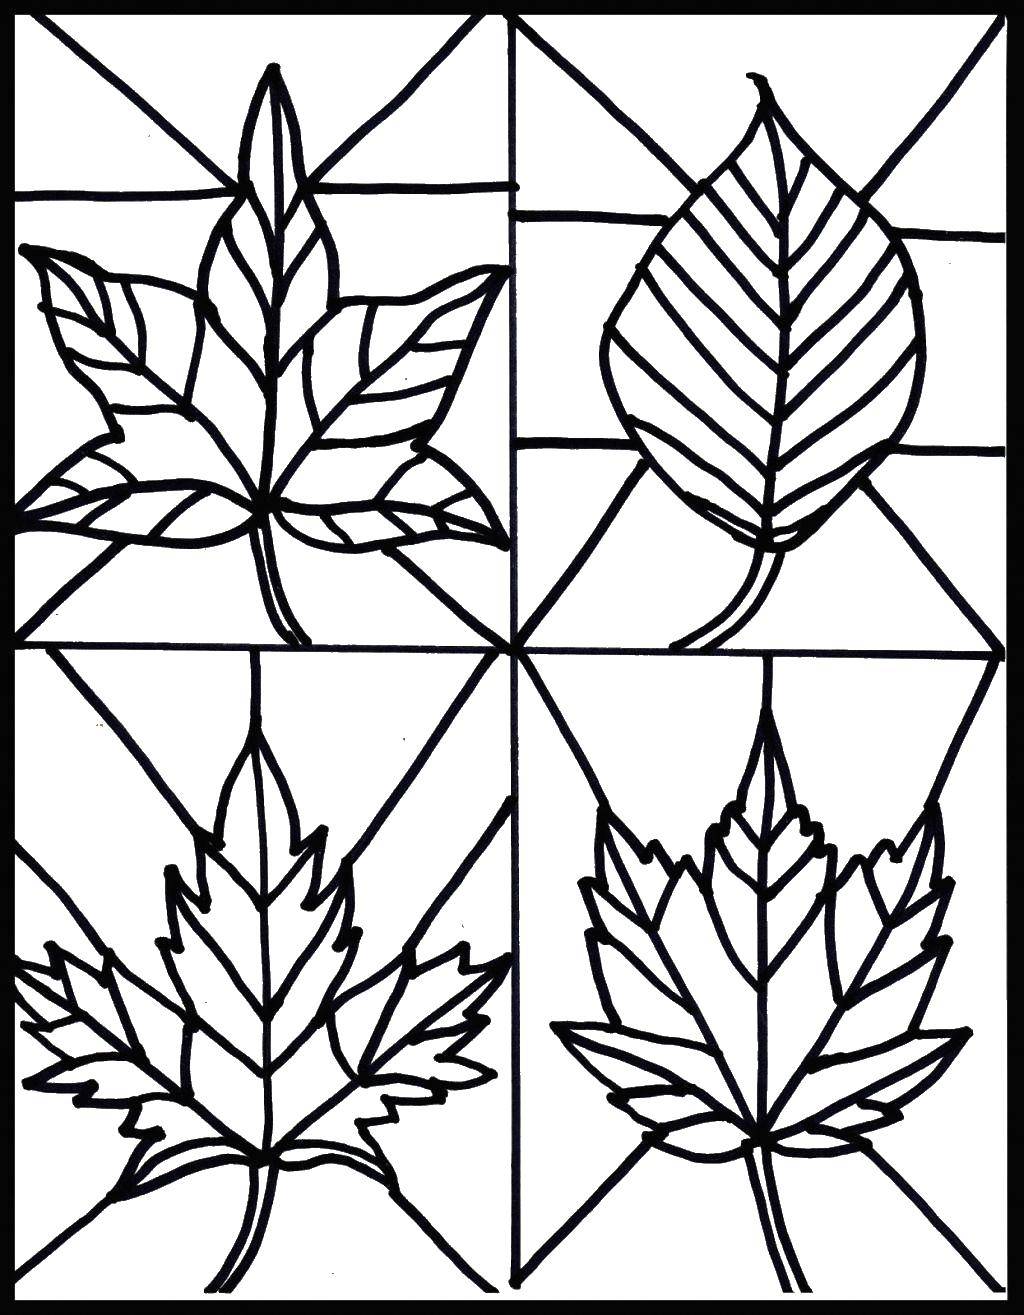 Coloring Stained glass sheets. Category leaves. Tags:  the leaves, stained glass.